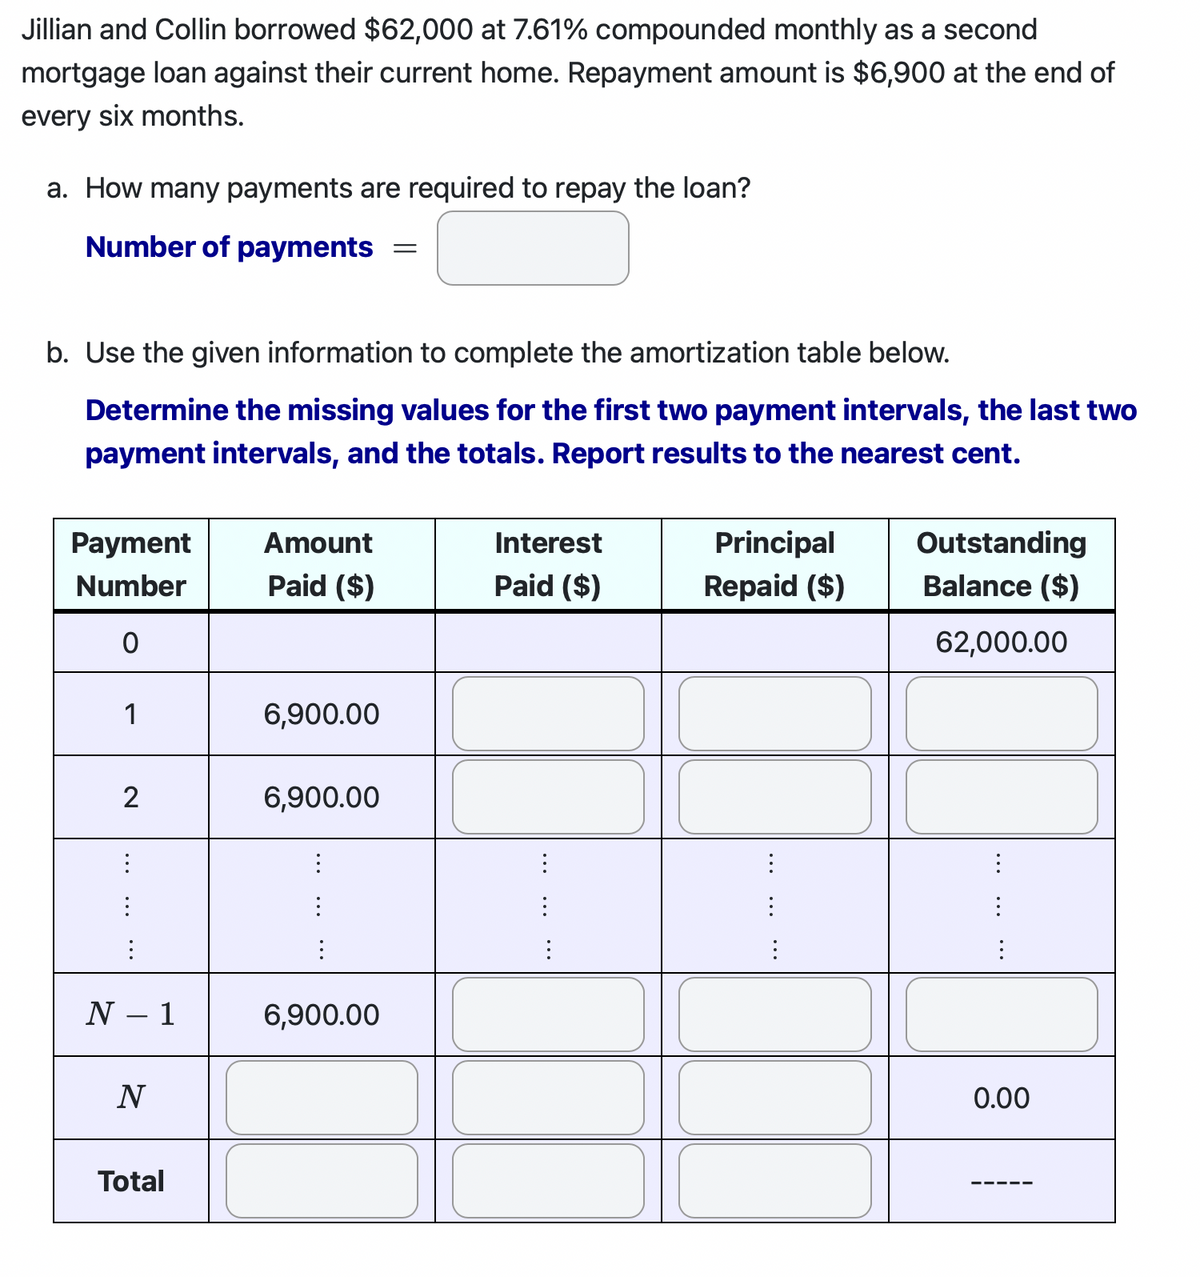 Jillian and Collin borrowed $62,000 at 7.61% compounded monthly as a second
mortgage loan against their current home. Repayment amount is $6,900 at the end of
every six months.
a. How many payments are required to repay the loan?
Number of payments
b. Use the given information to complete the amortization table below.
Determine the missing values for the first two payment intervals, the last two
payment intervals, and the totals. Report results to the nearest cent.
Payment Amount
Number
Paid ($)
0
1
2
:
:
N - 1
N
Total
6,900.00
6,900.00
:
:
=
6,900.00
Interest
Paid ($)
:
:
:
Principal
Repaid ($)
:
:
Outstanding
Balance ($)
62,000.00
:
:
0.00